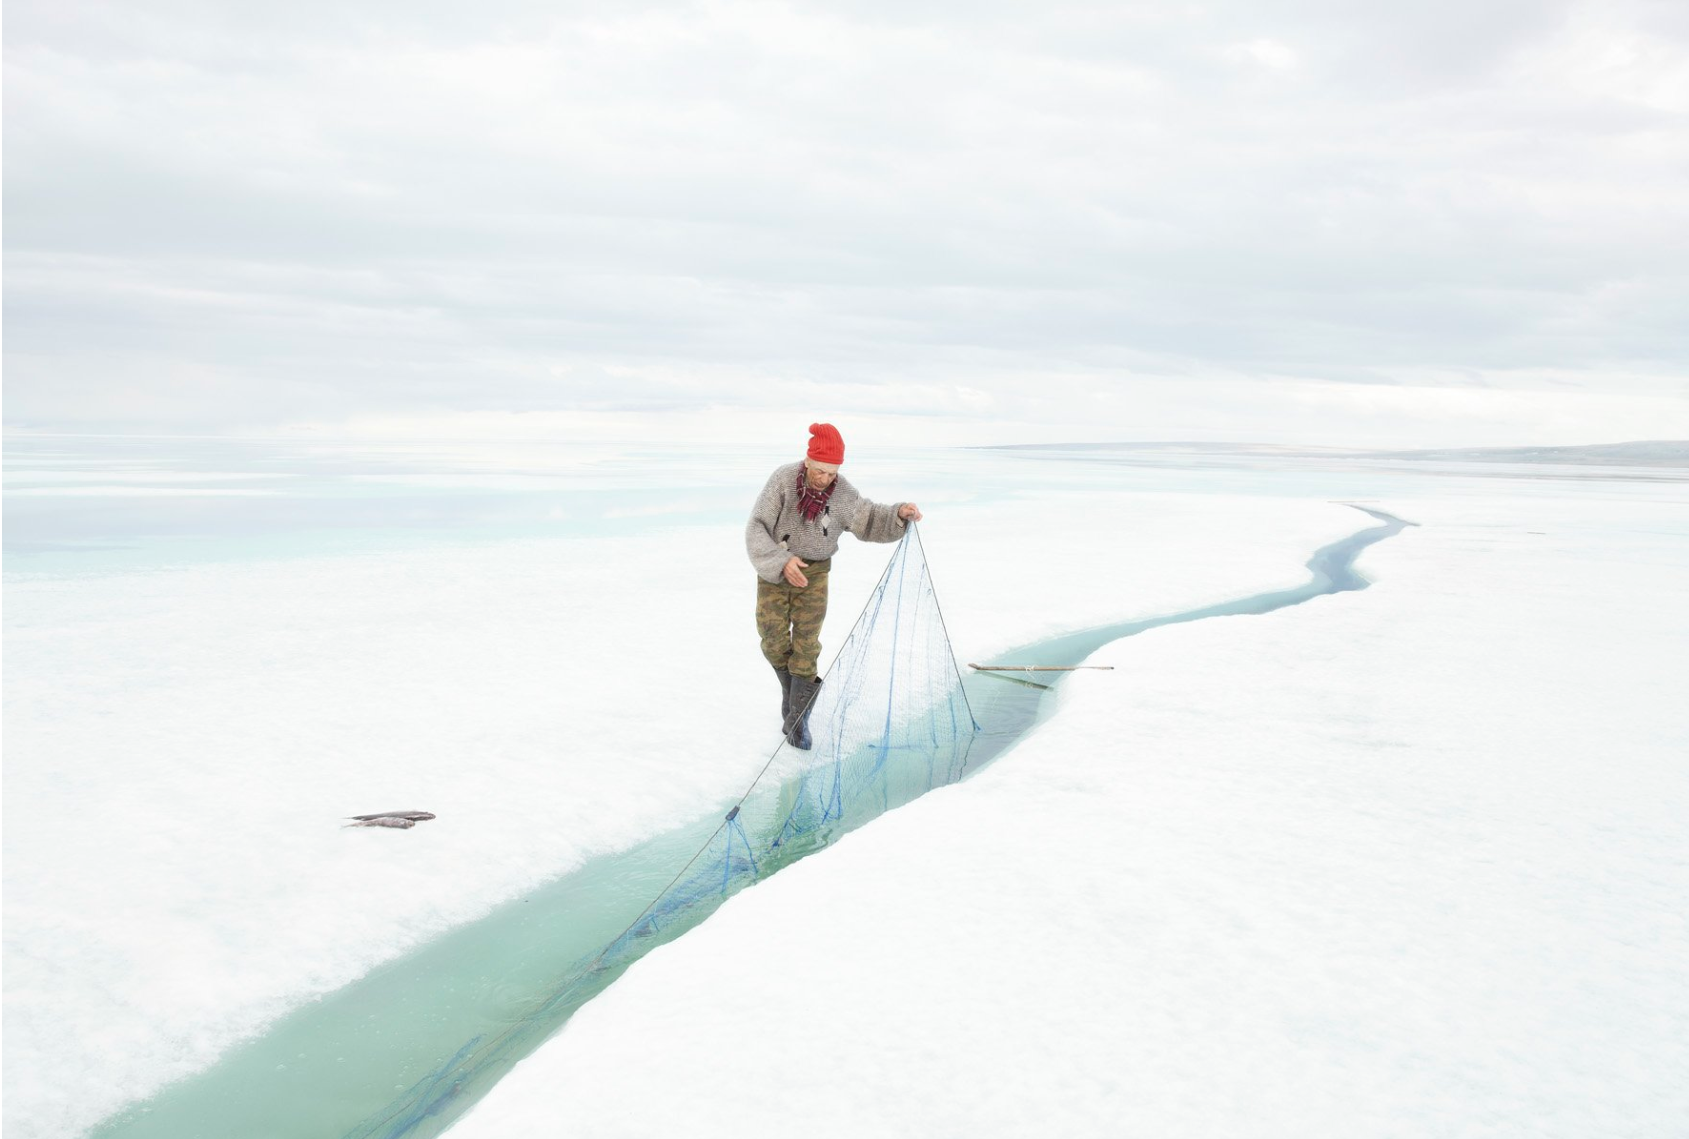 Man drops a fishing net into a watery opening in ice against an icy white landscape